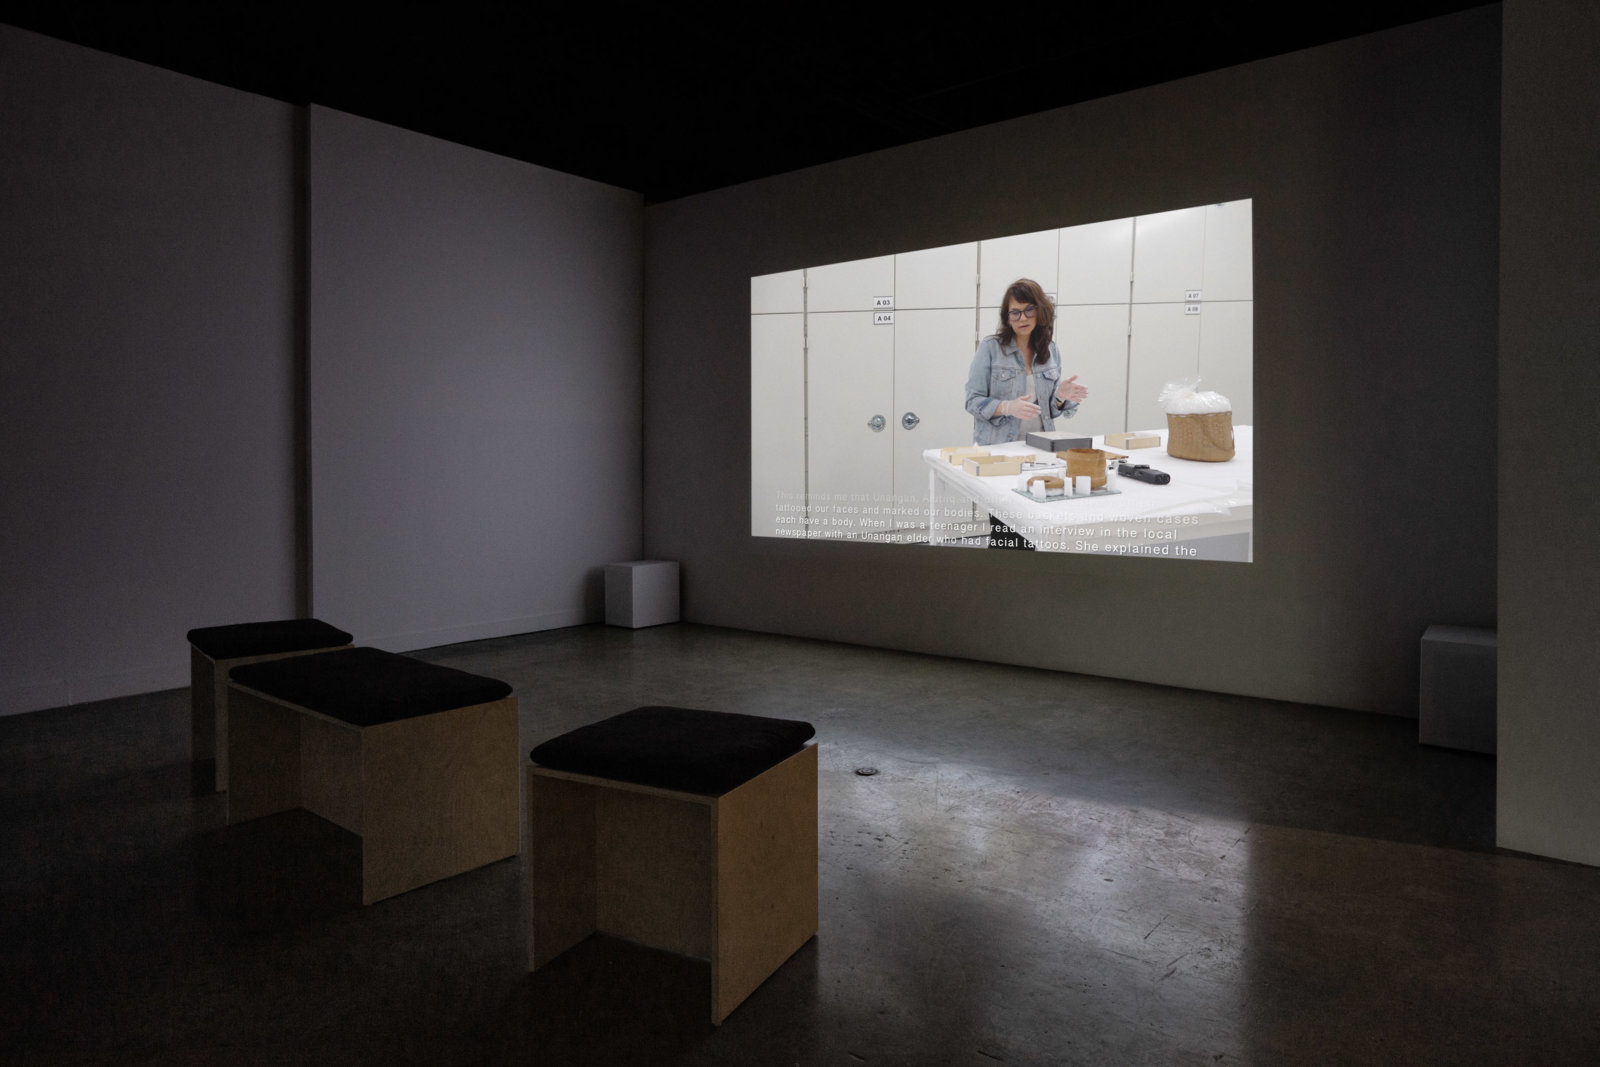 Tanya Lukin Linklater, An amplification through many minds, 2019, video, 36 minutes, 32 seconds. Installation view, My Mind Is With The Weather, Oakville Galleries, Canada, 2022